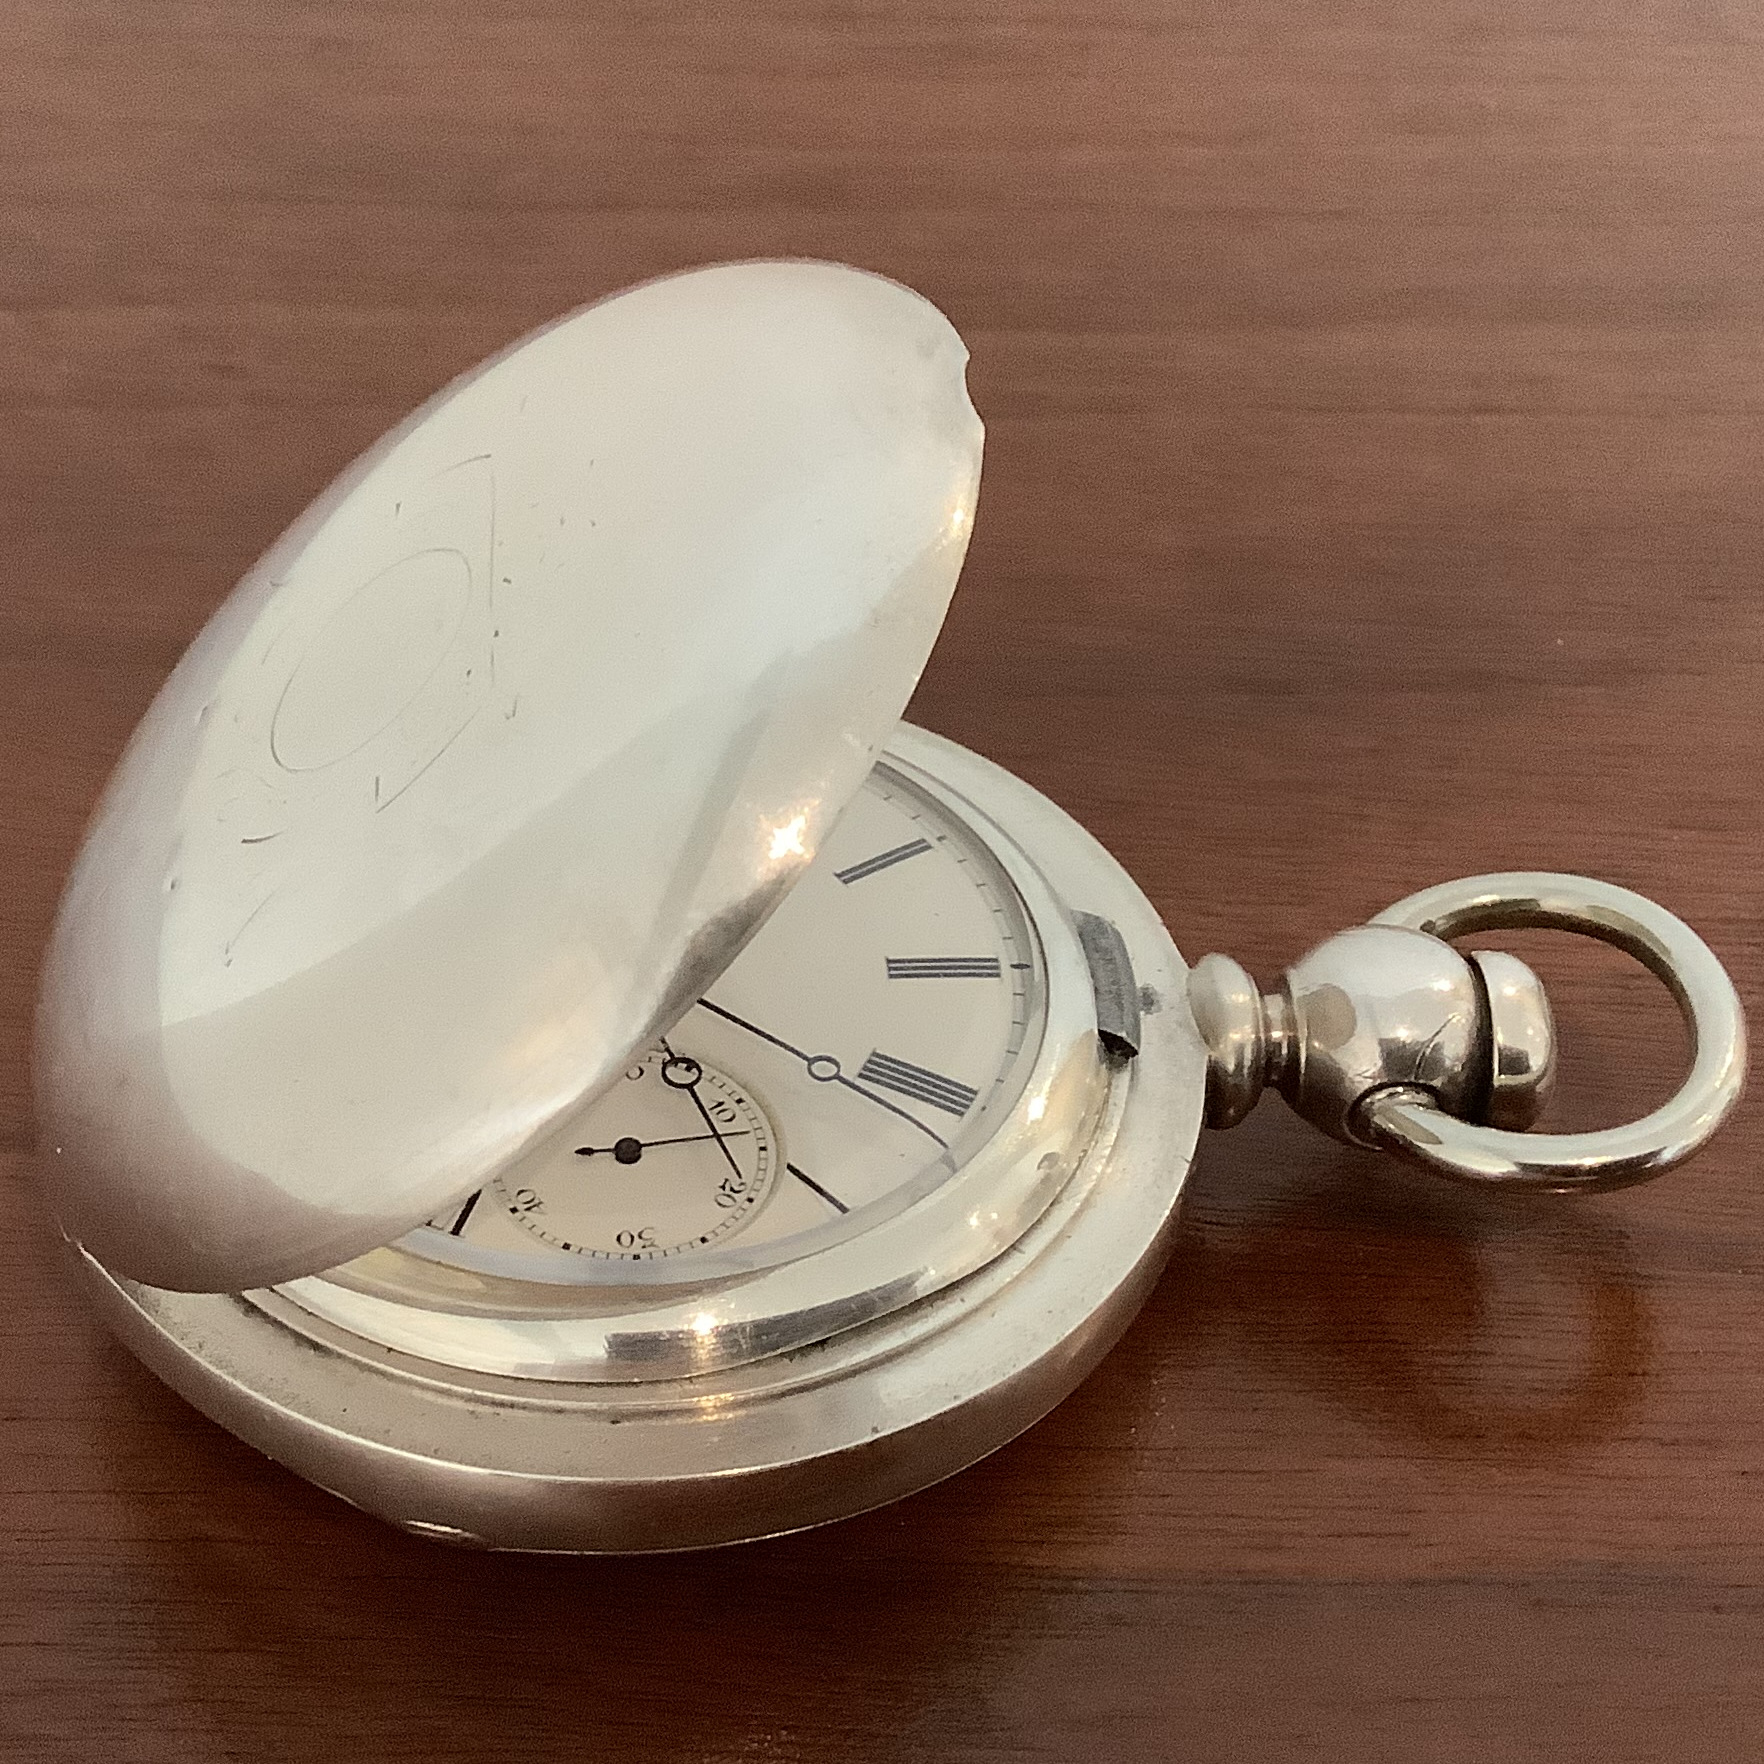 Elgin 18S six-ounce hunter pocket watch in coin silver with key wind